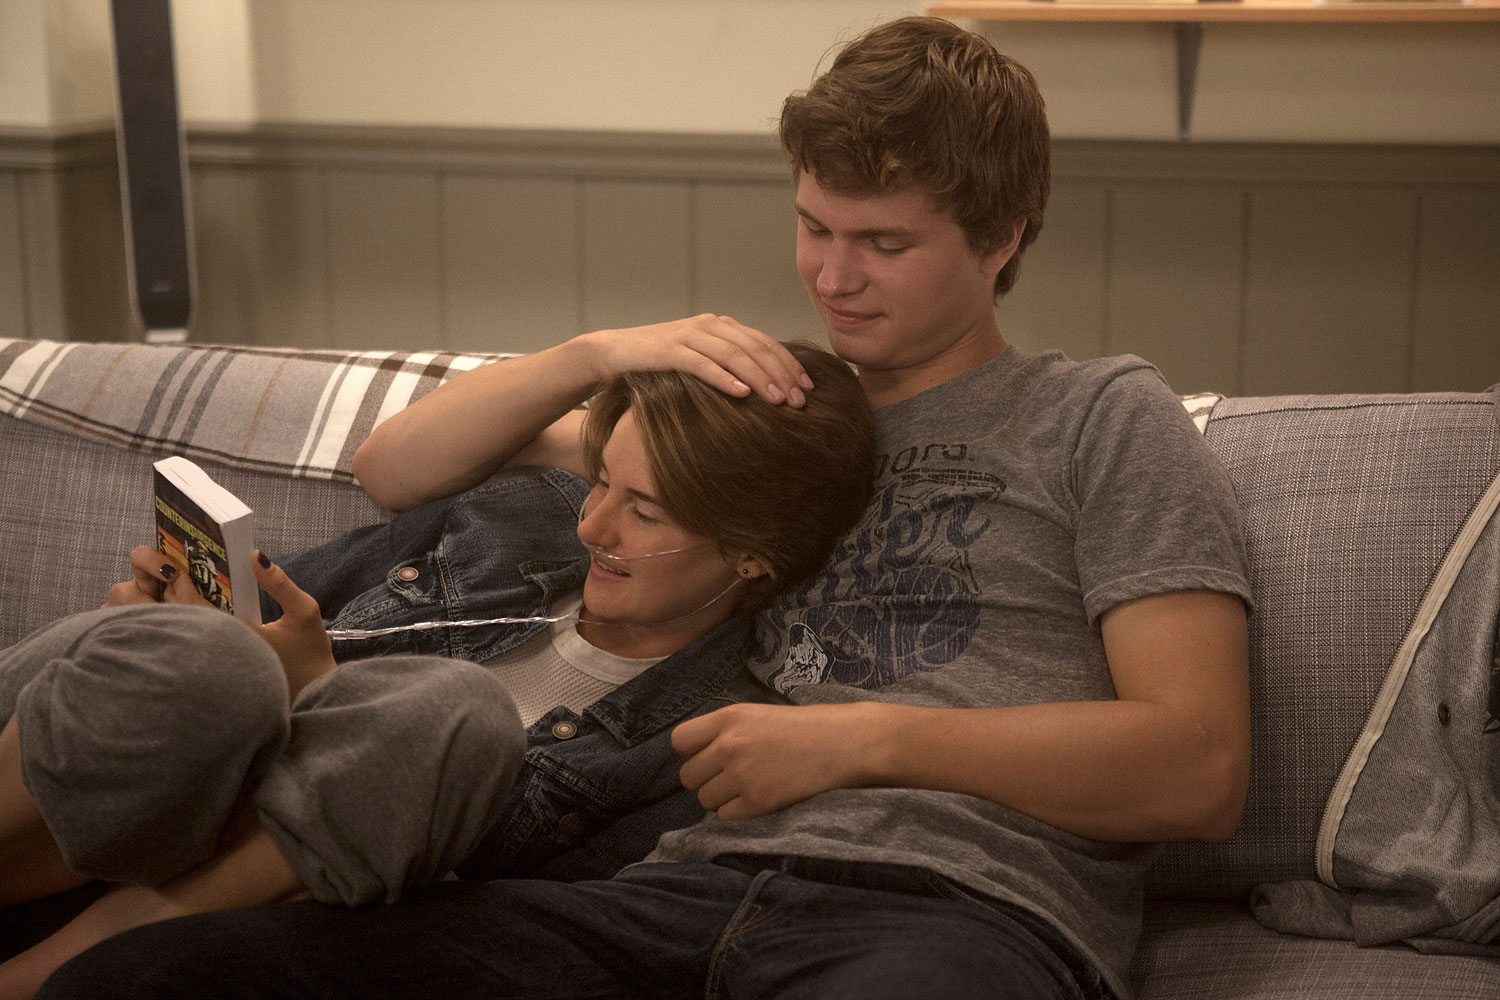 Films about cancer, such as 'The Fault in Our Stars,' can offer a new understanding of humanity.